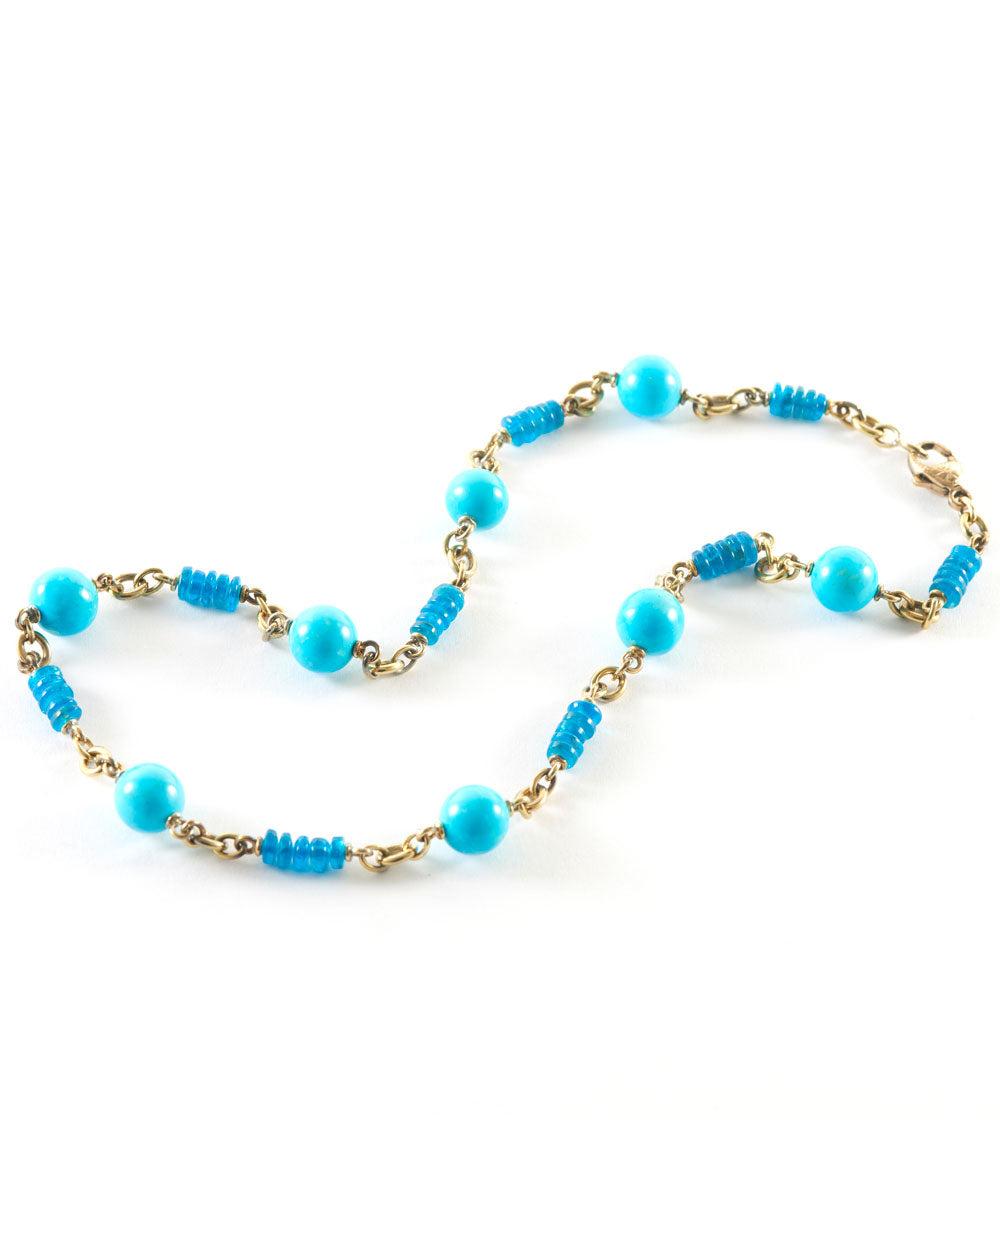 White Gold Apatite and Sleeping Beauty Turquoise Beaded Necklace